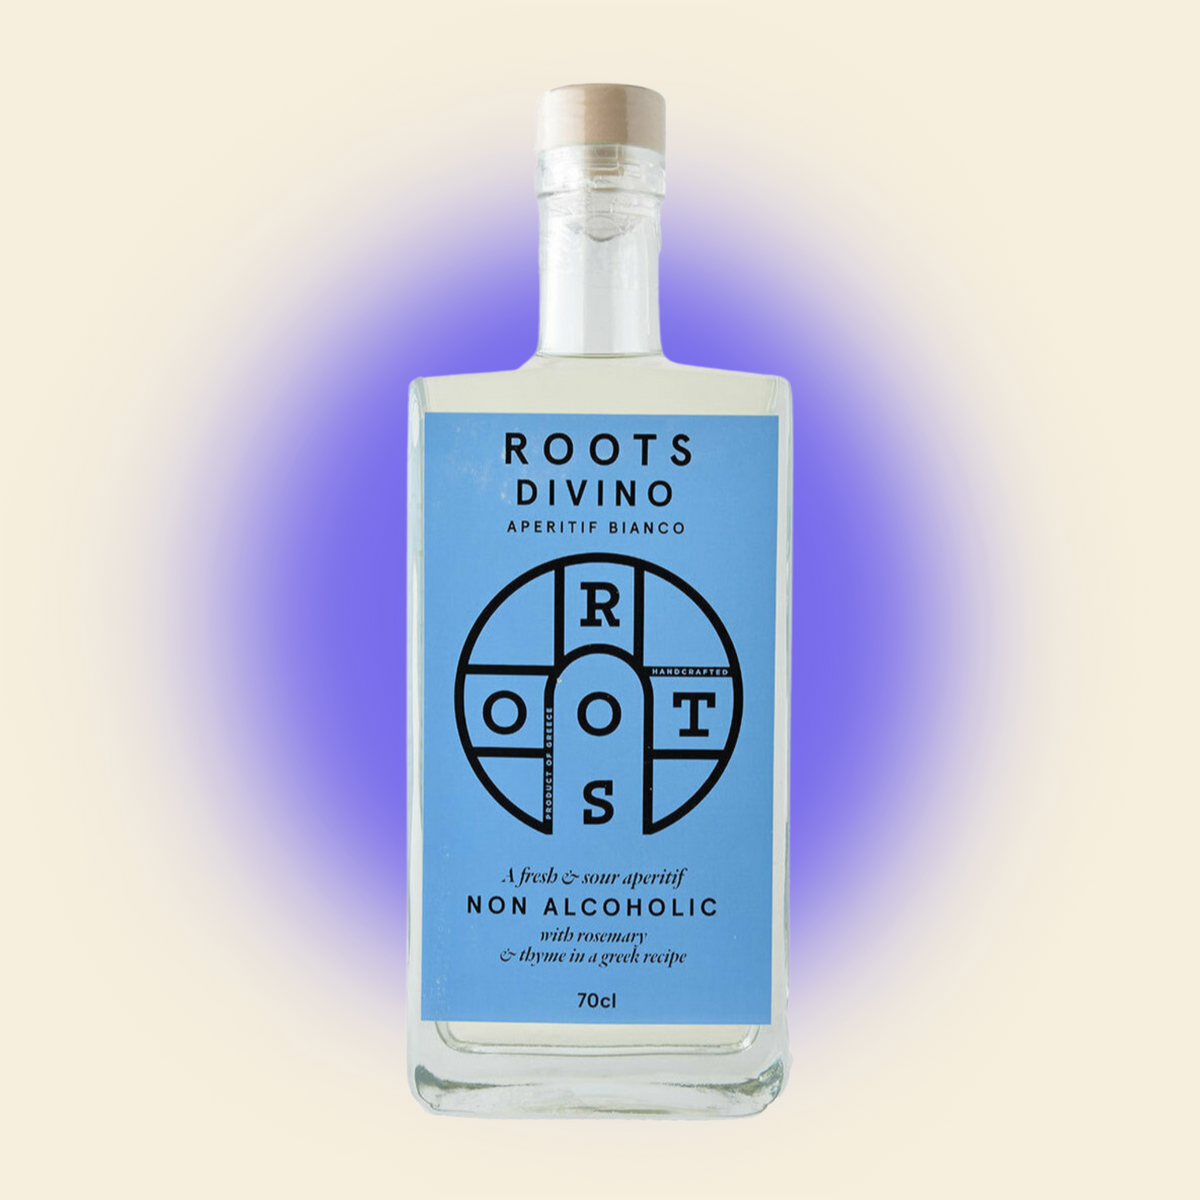 Roots Divino - Bianco Vermouth